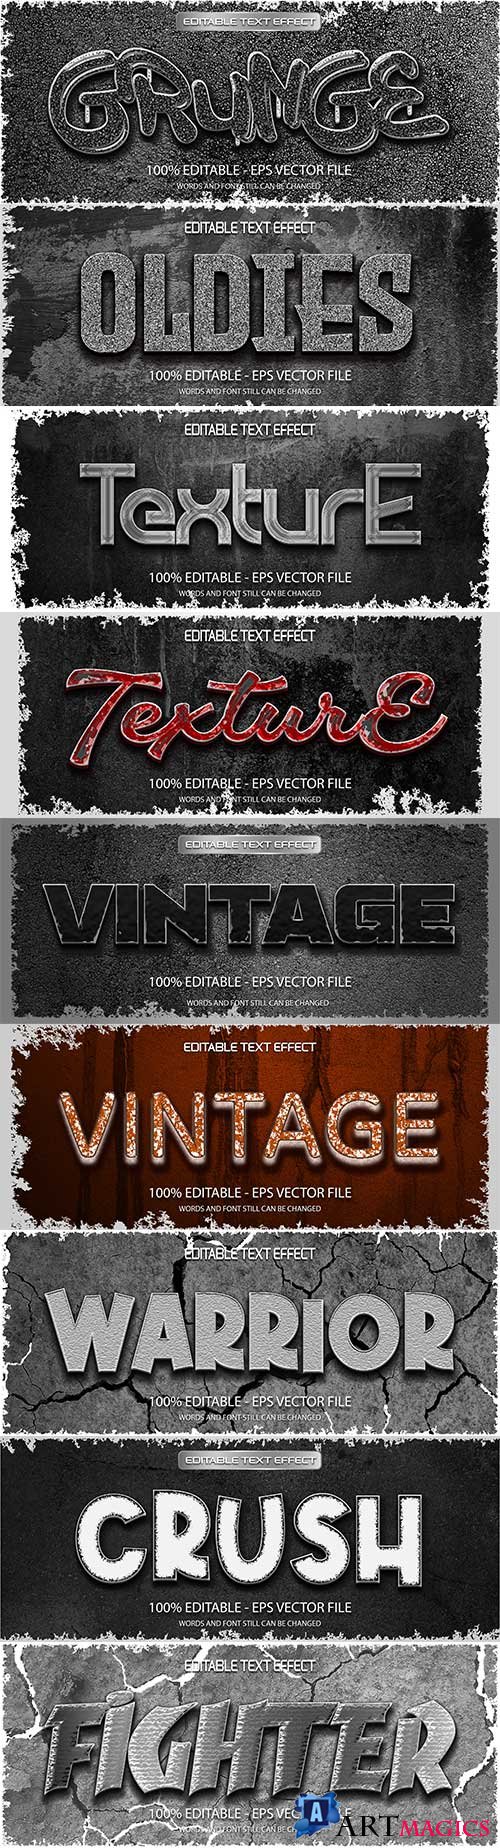 Vintage text effect vector background